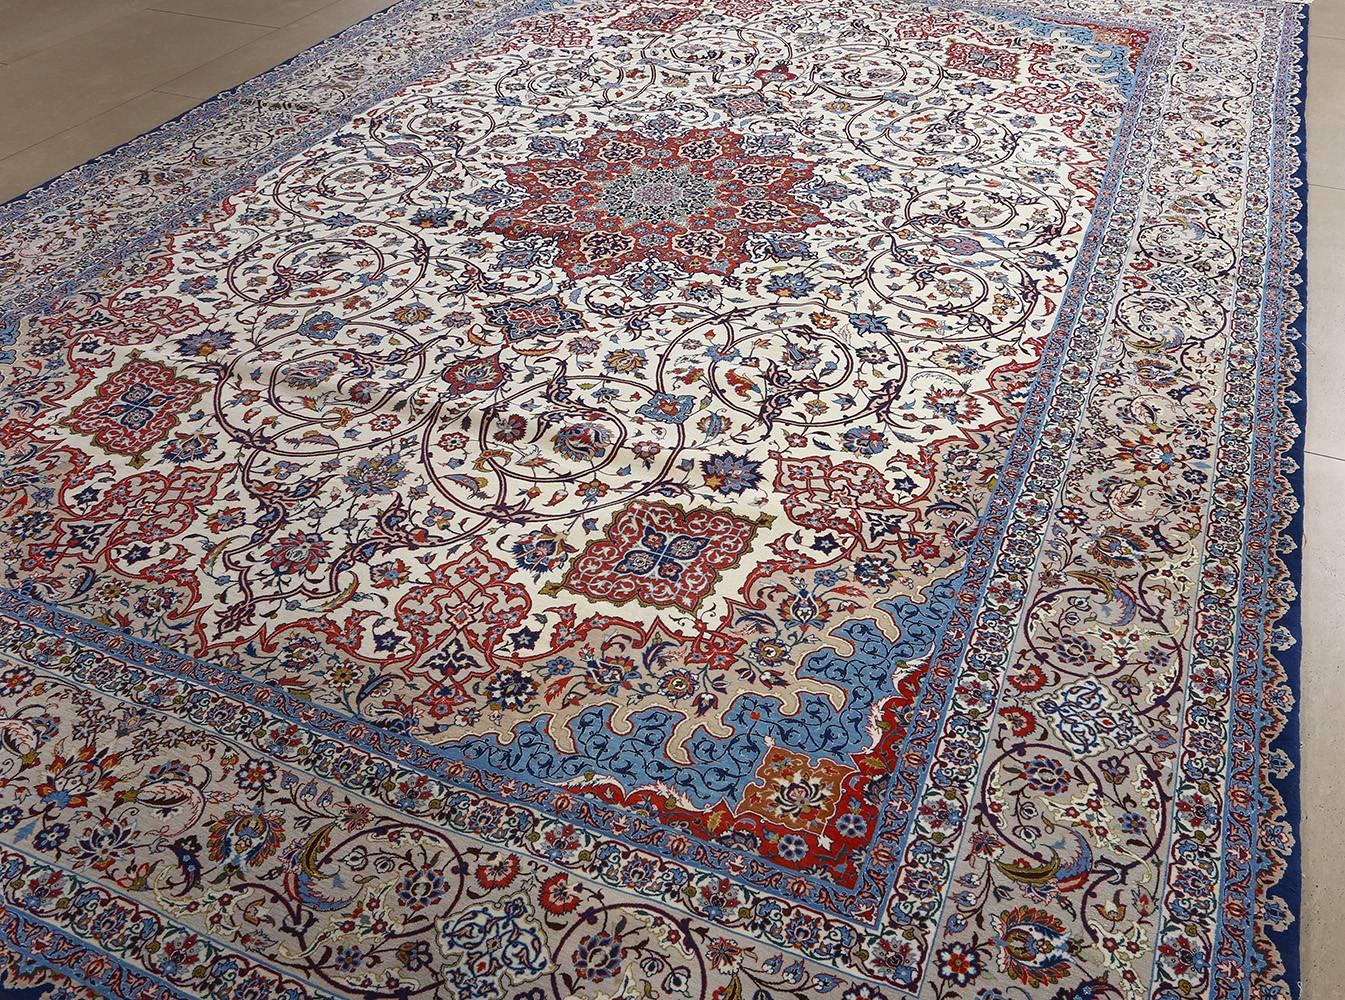 Hand-Knotted Fine Vintage Isfahan Persian Rug. Size: 10 ft 2 in x 14 ft 7 in (3.1 m x 4.44 m)